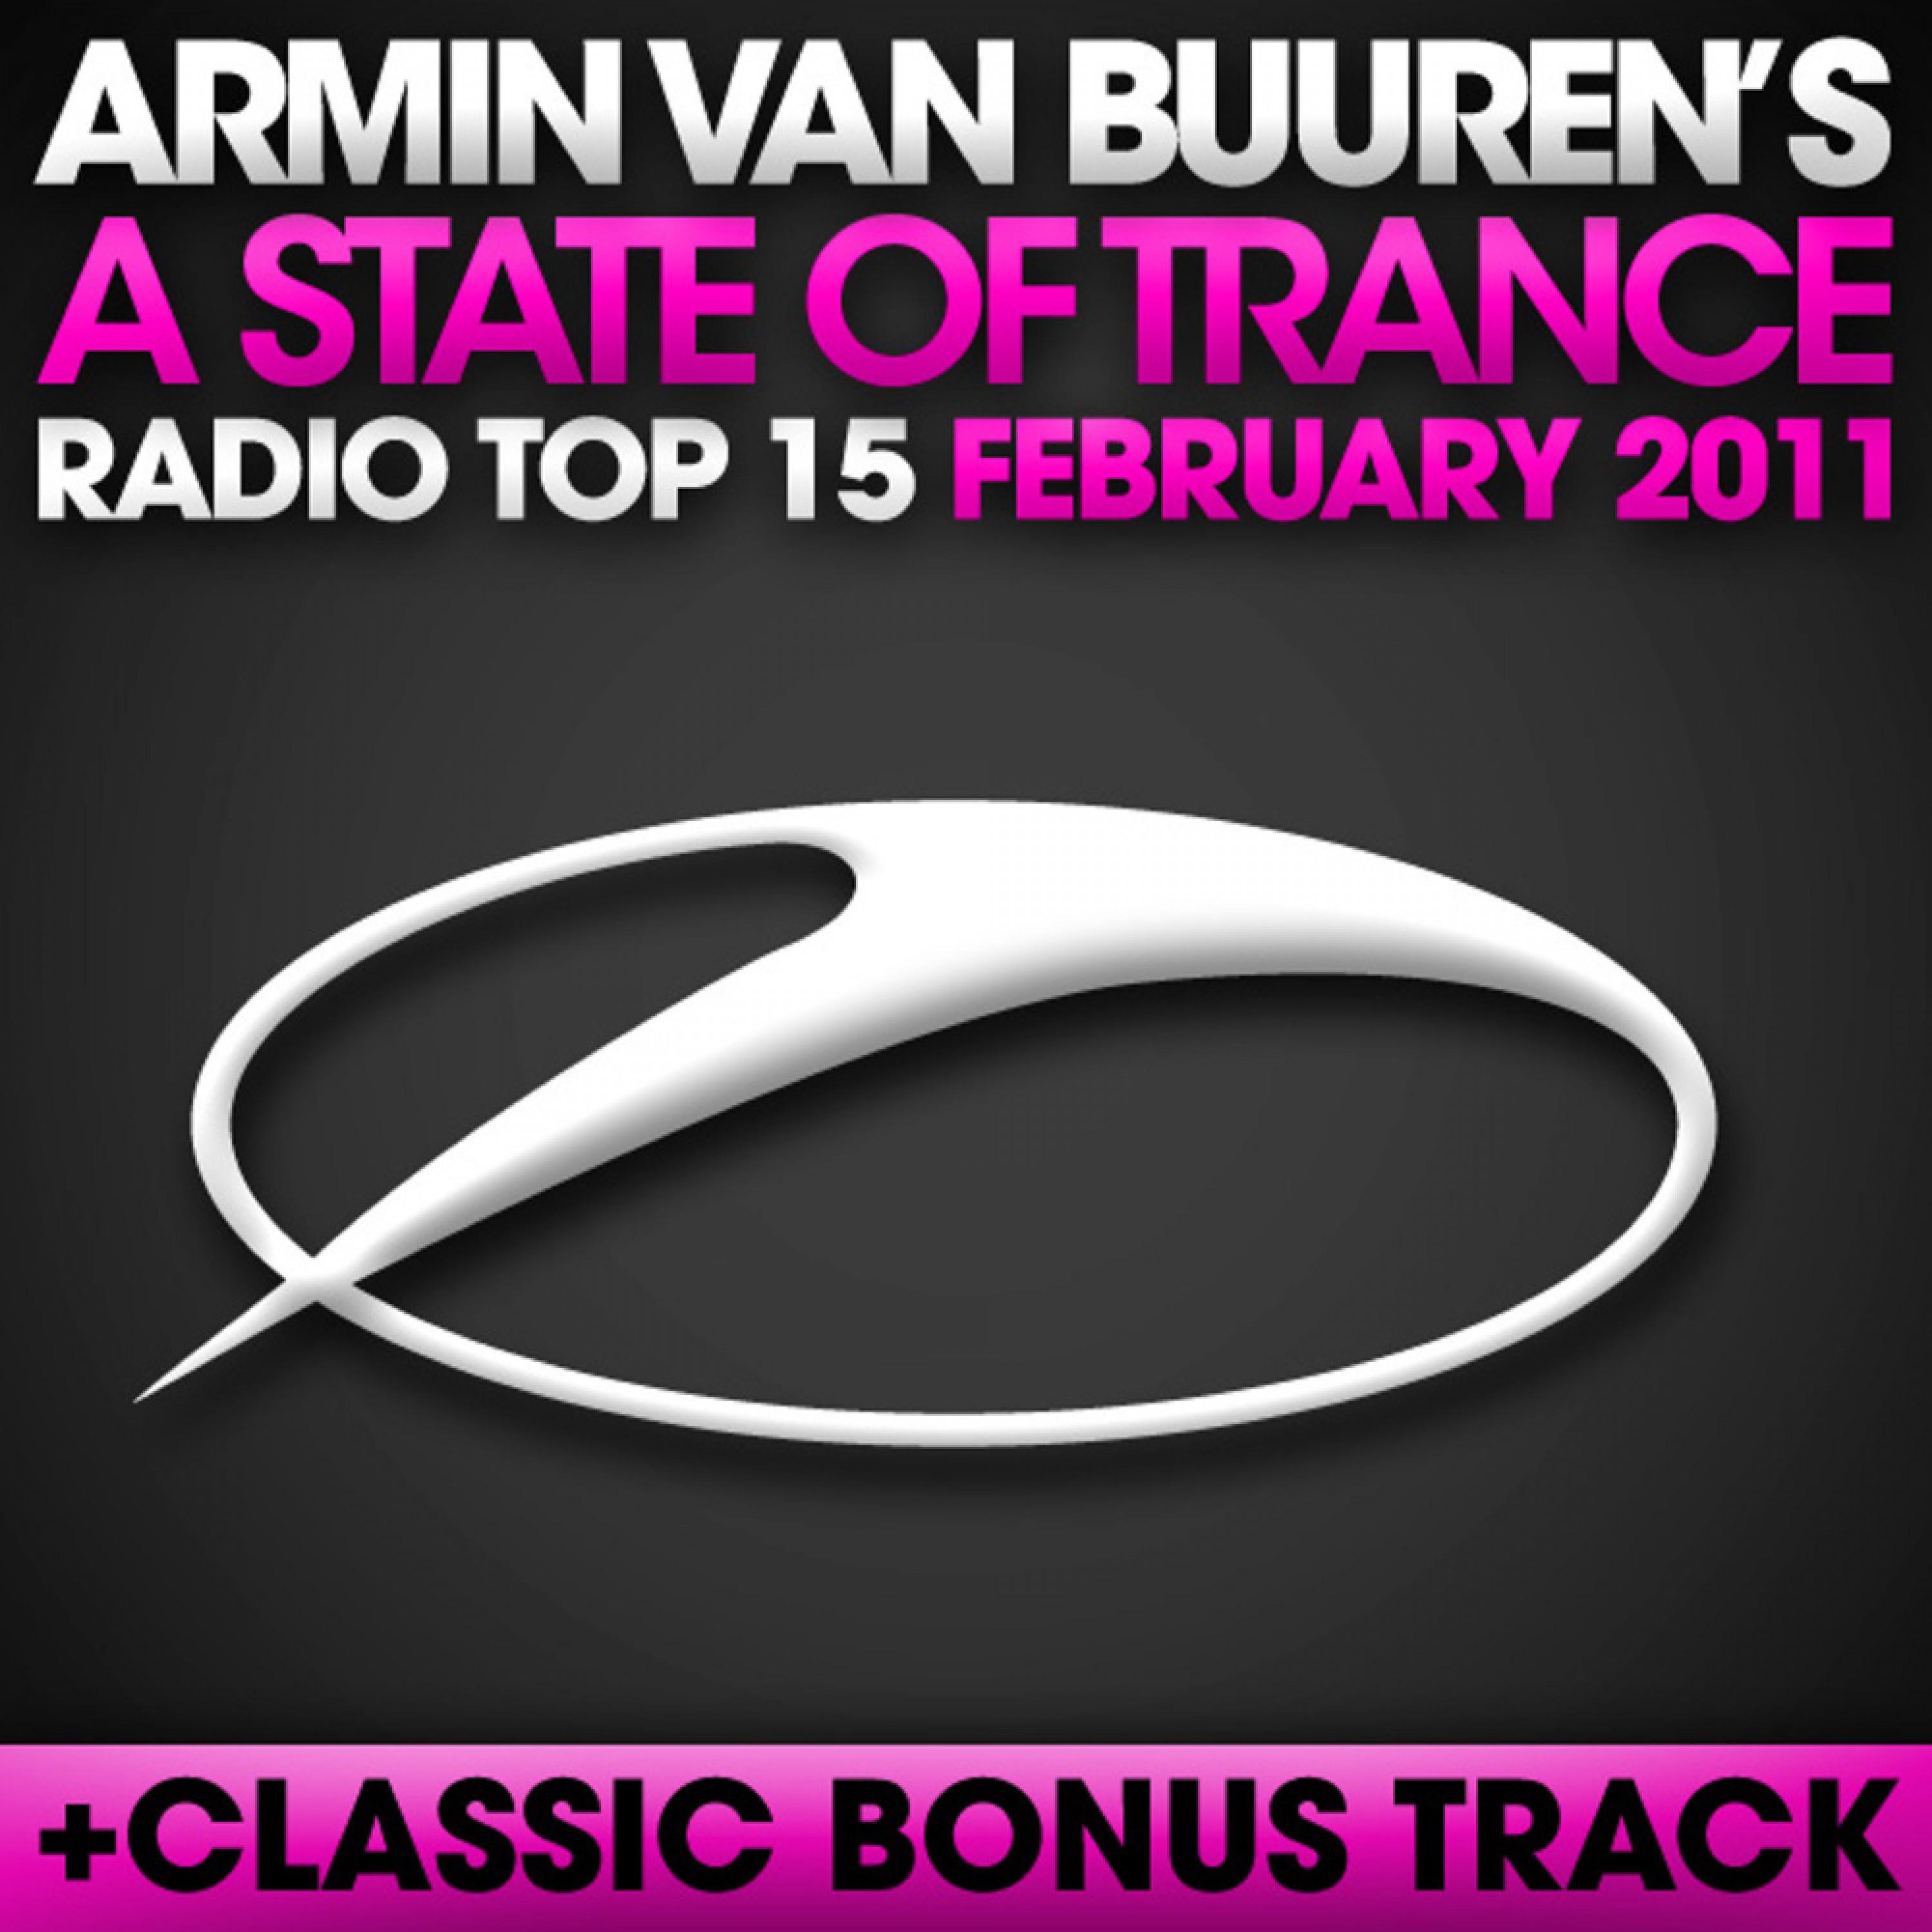 A State of Trance Radio Top 15 - February 2011专辑